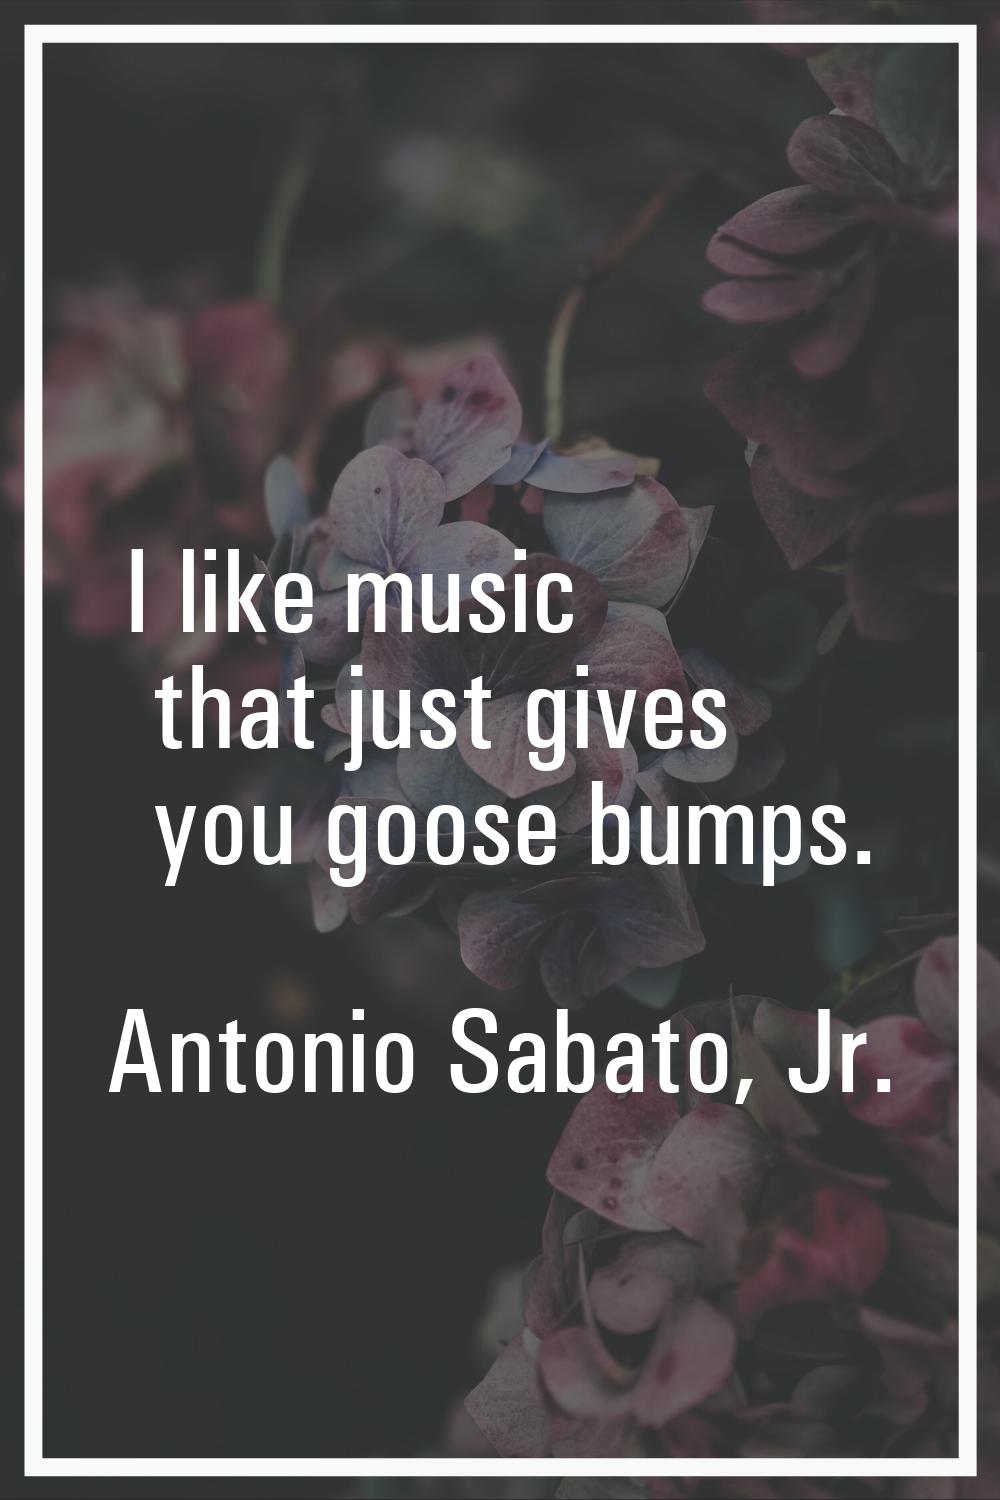 I like music that just gives you goose bumps.